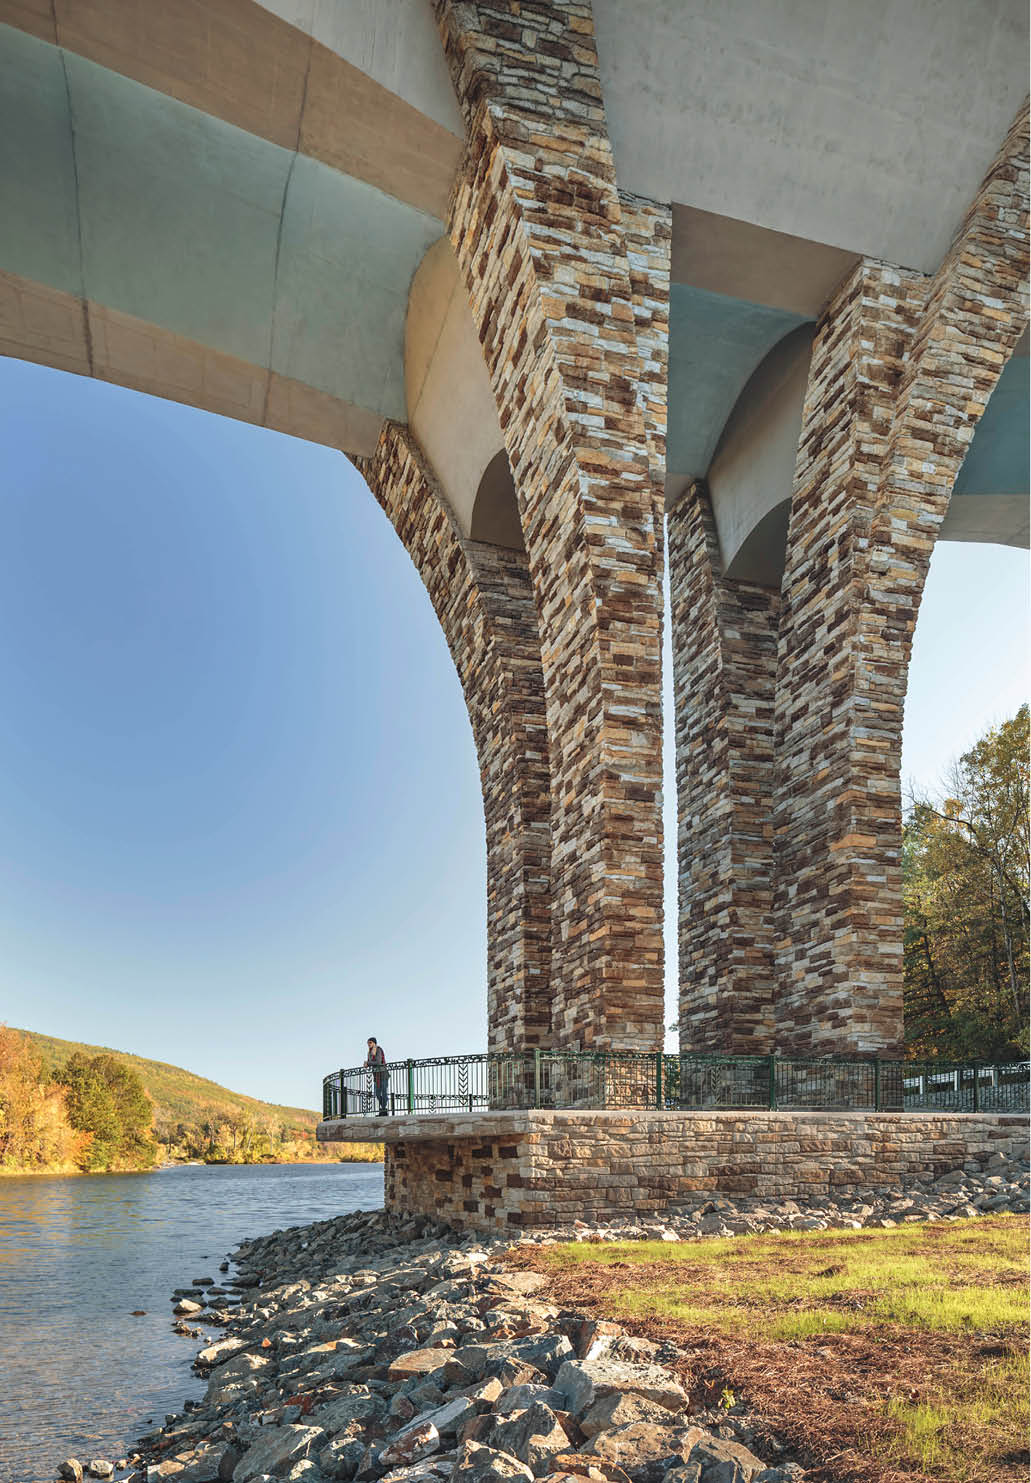 Columns that hold up the I-91 bridge in Vermont